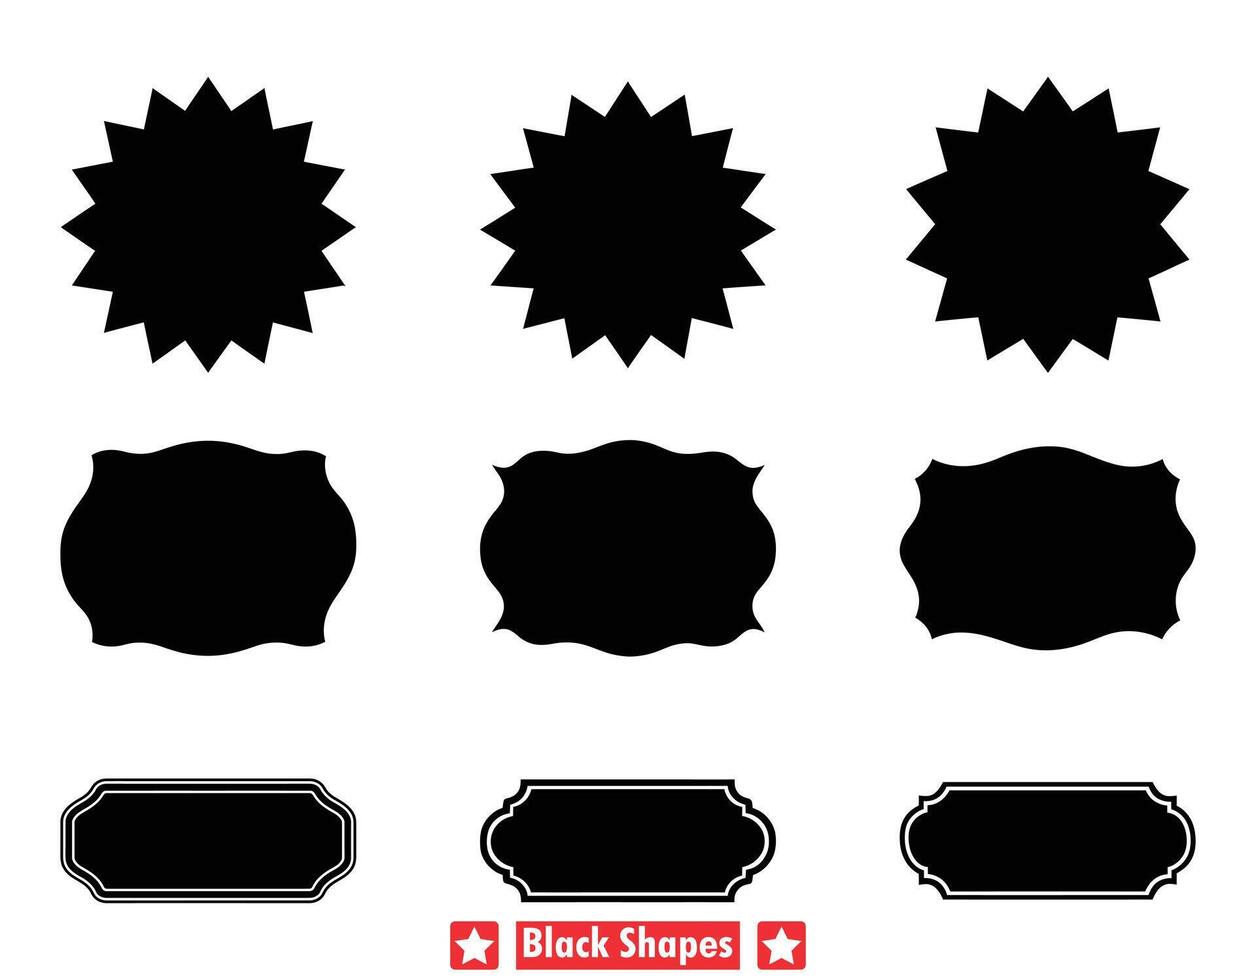 Abstract Silhouette Designs Essential Vector Shapes for Diverse Uses